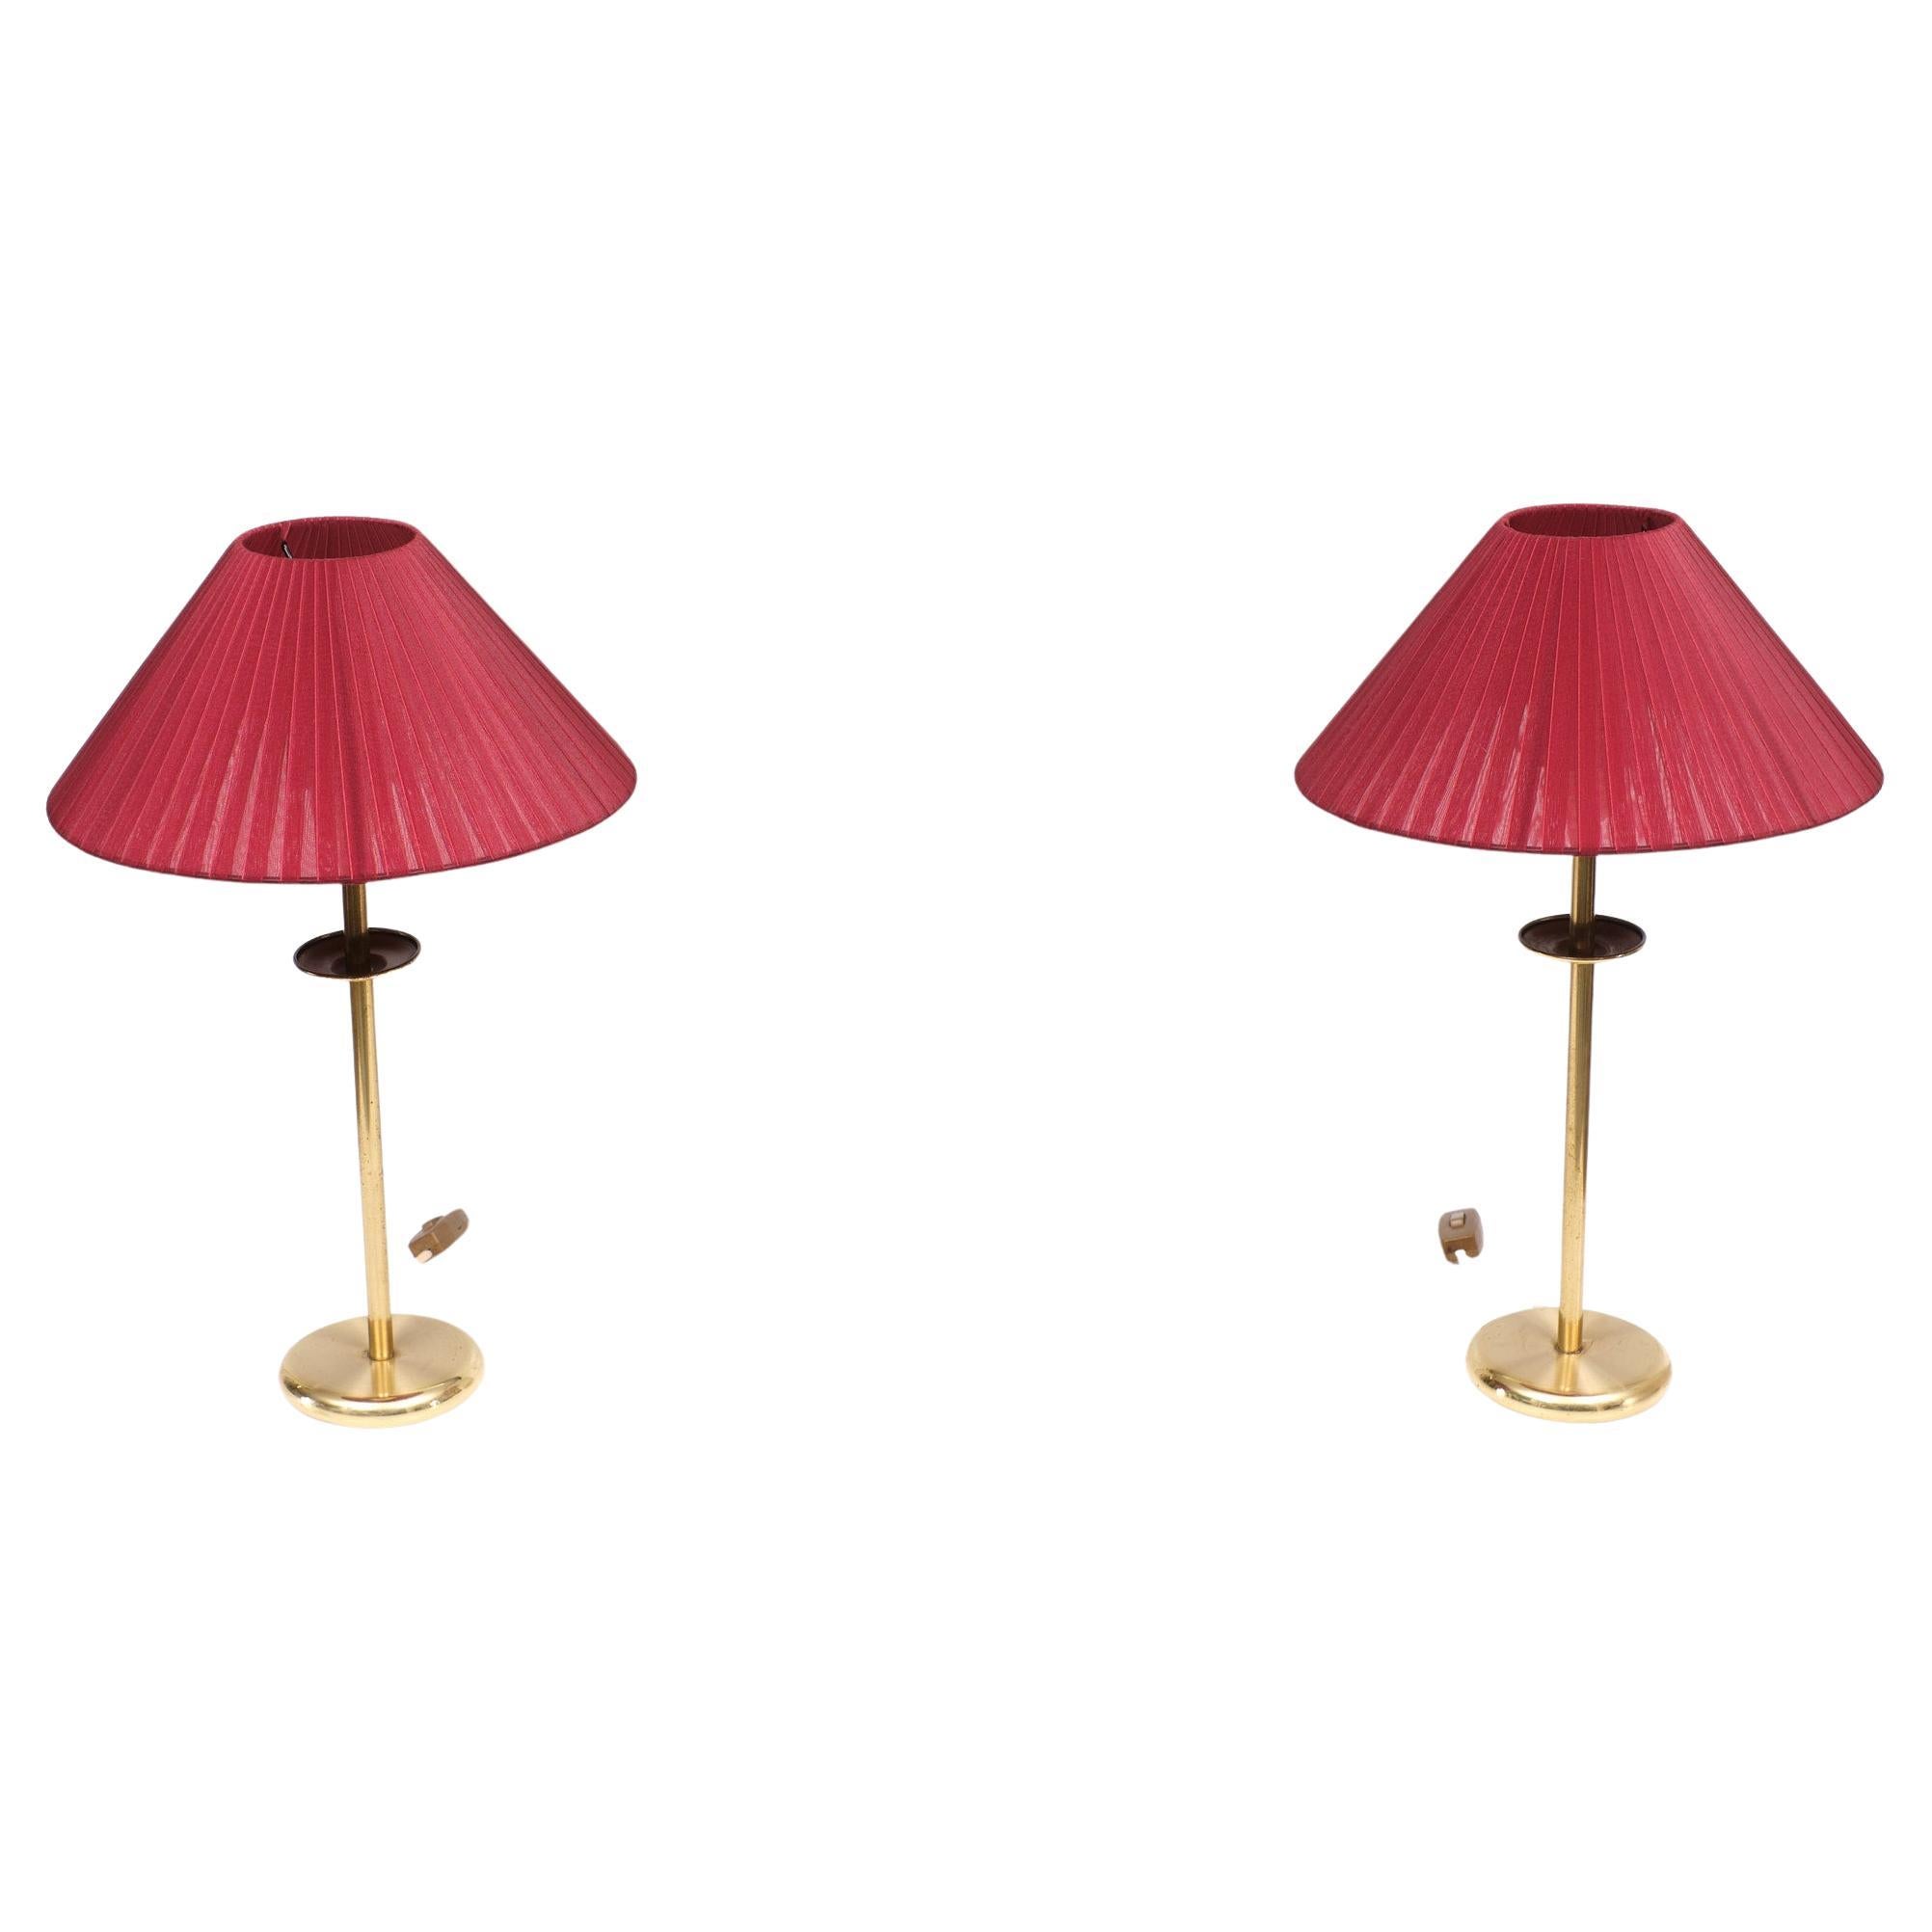 Two very nice brass table lamps comes with new red shades. Switch on 
the cord. Sleek design. Signed ATD.